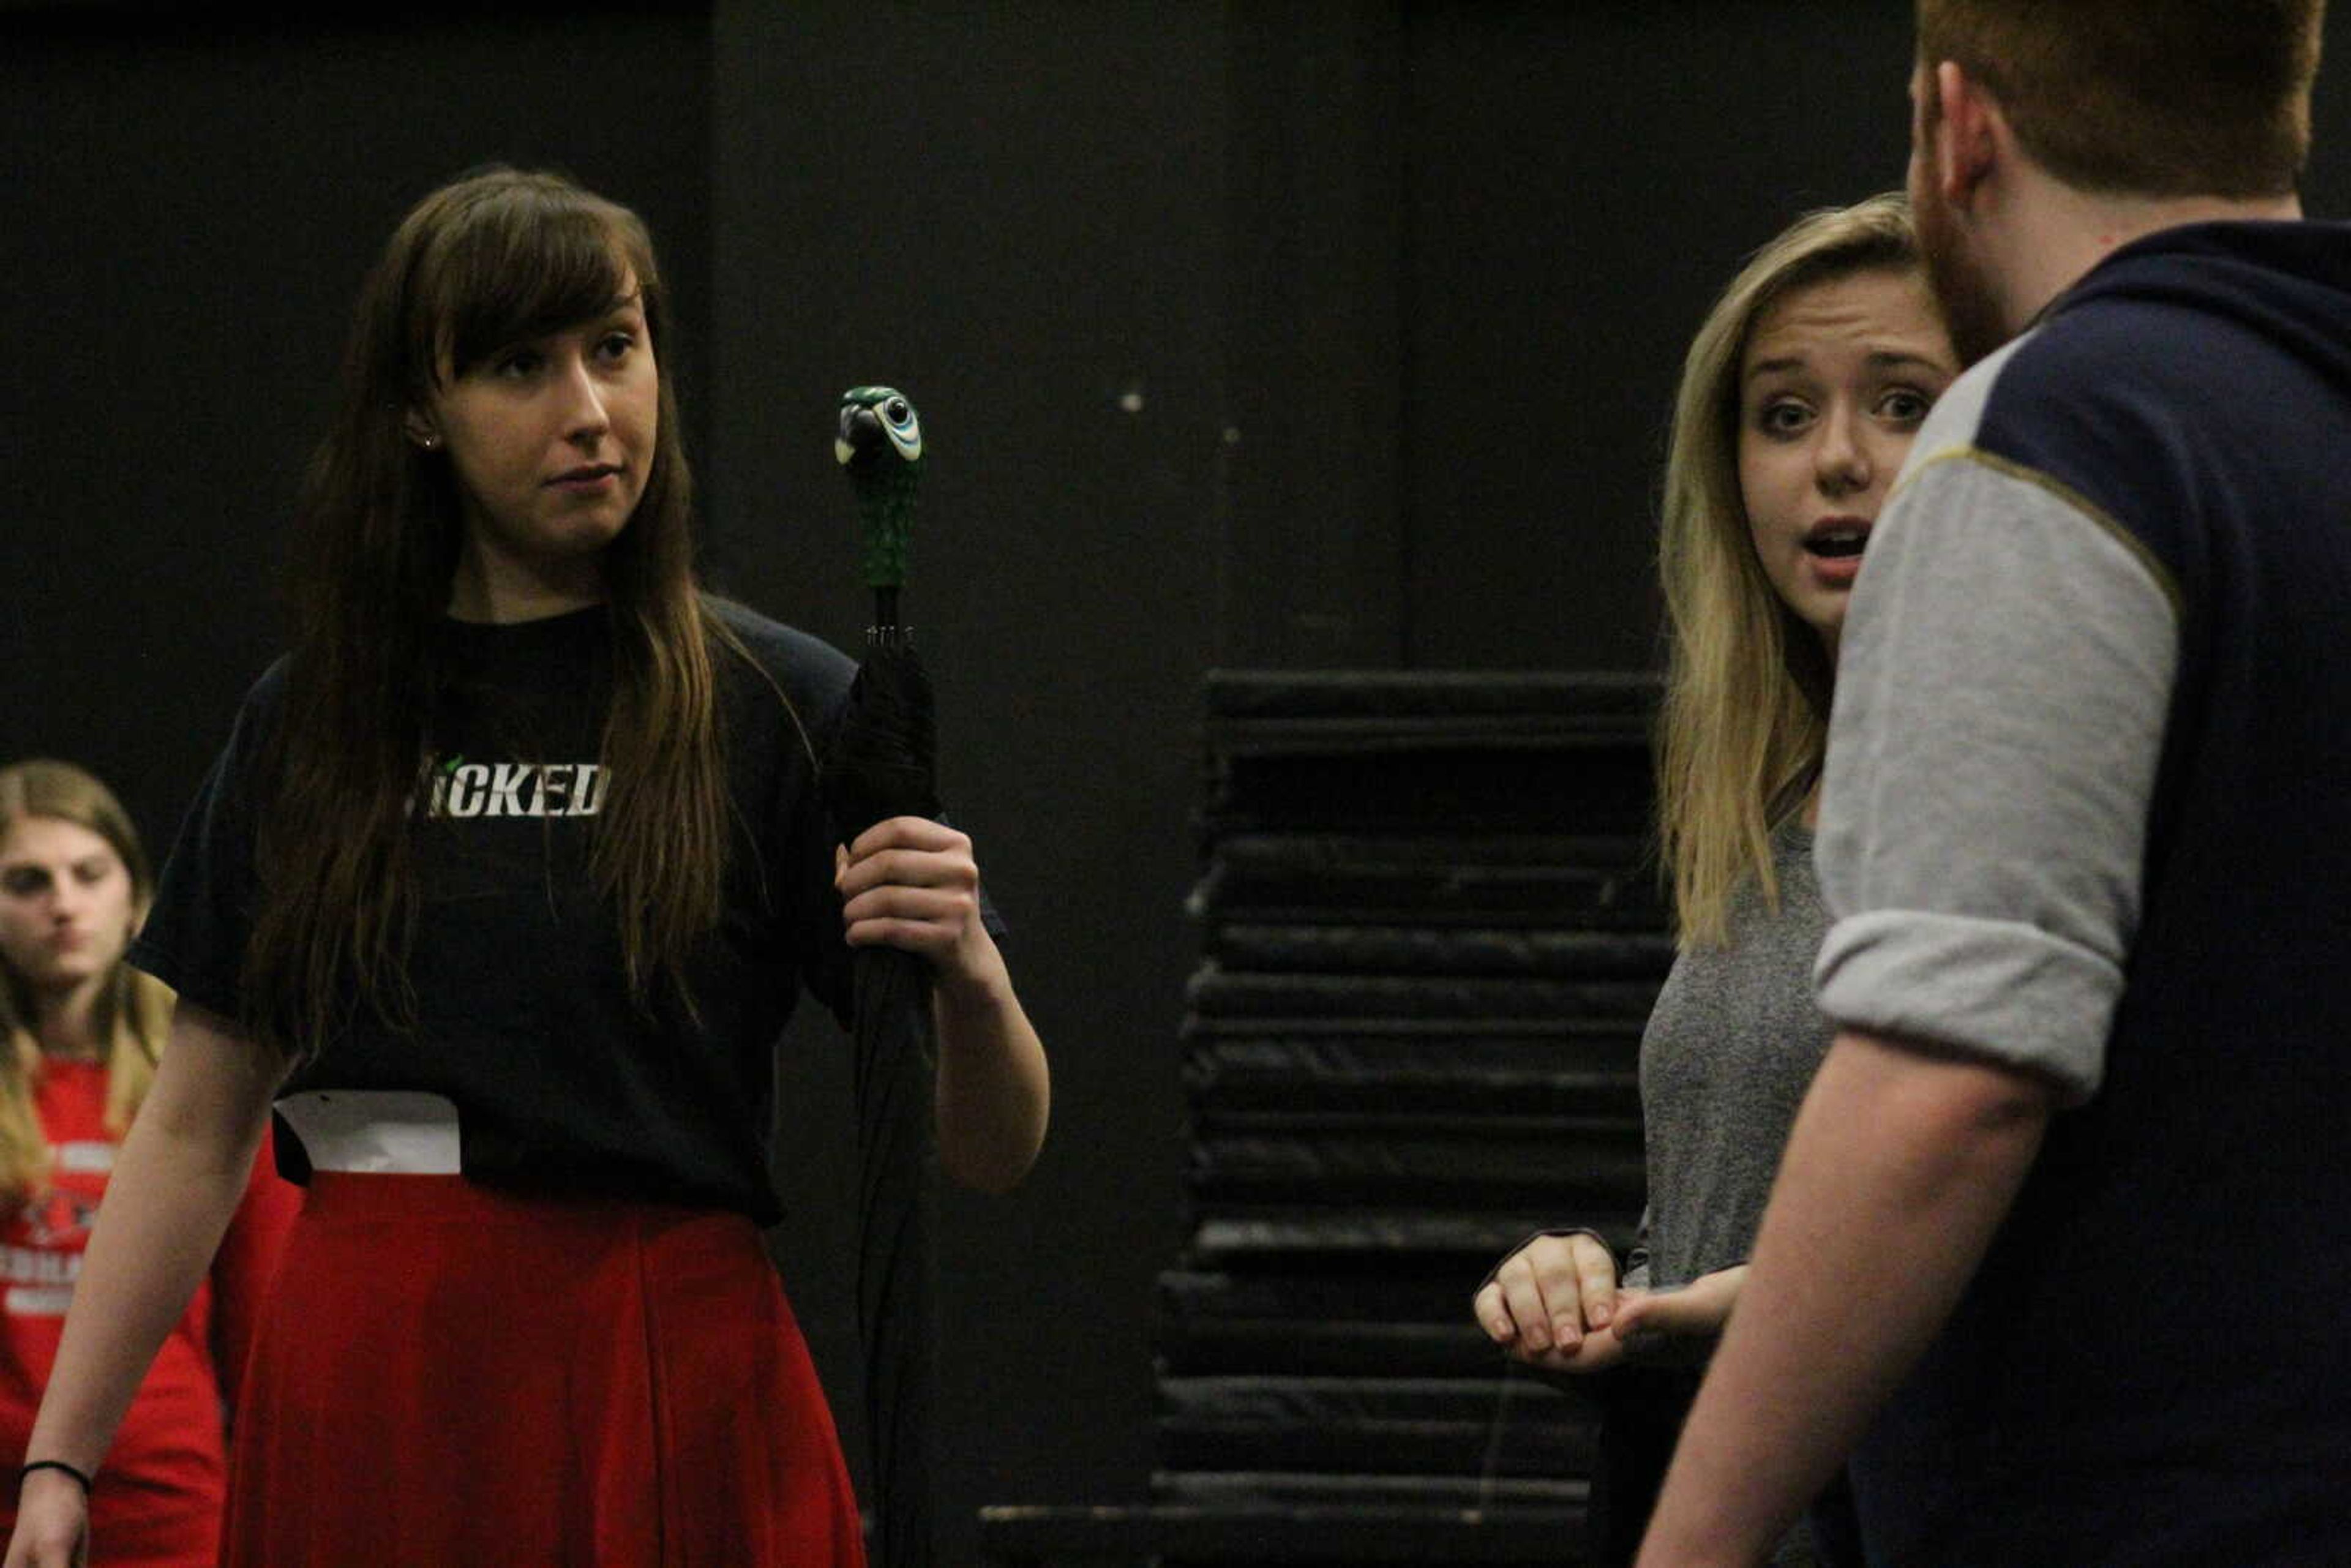 Southeast Senior Abigail Alsmeyer, playing Mary Poppins, speaks to Southeast senior Jacquelyn Kiefner during a Mary Poppins rehearsal. Jan 29.